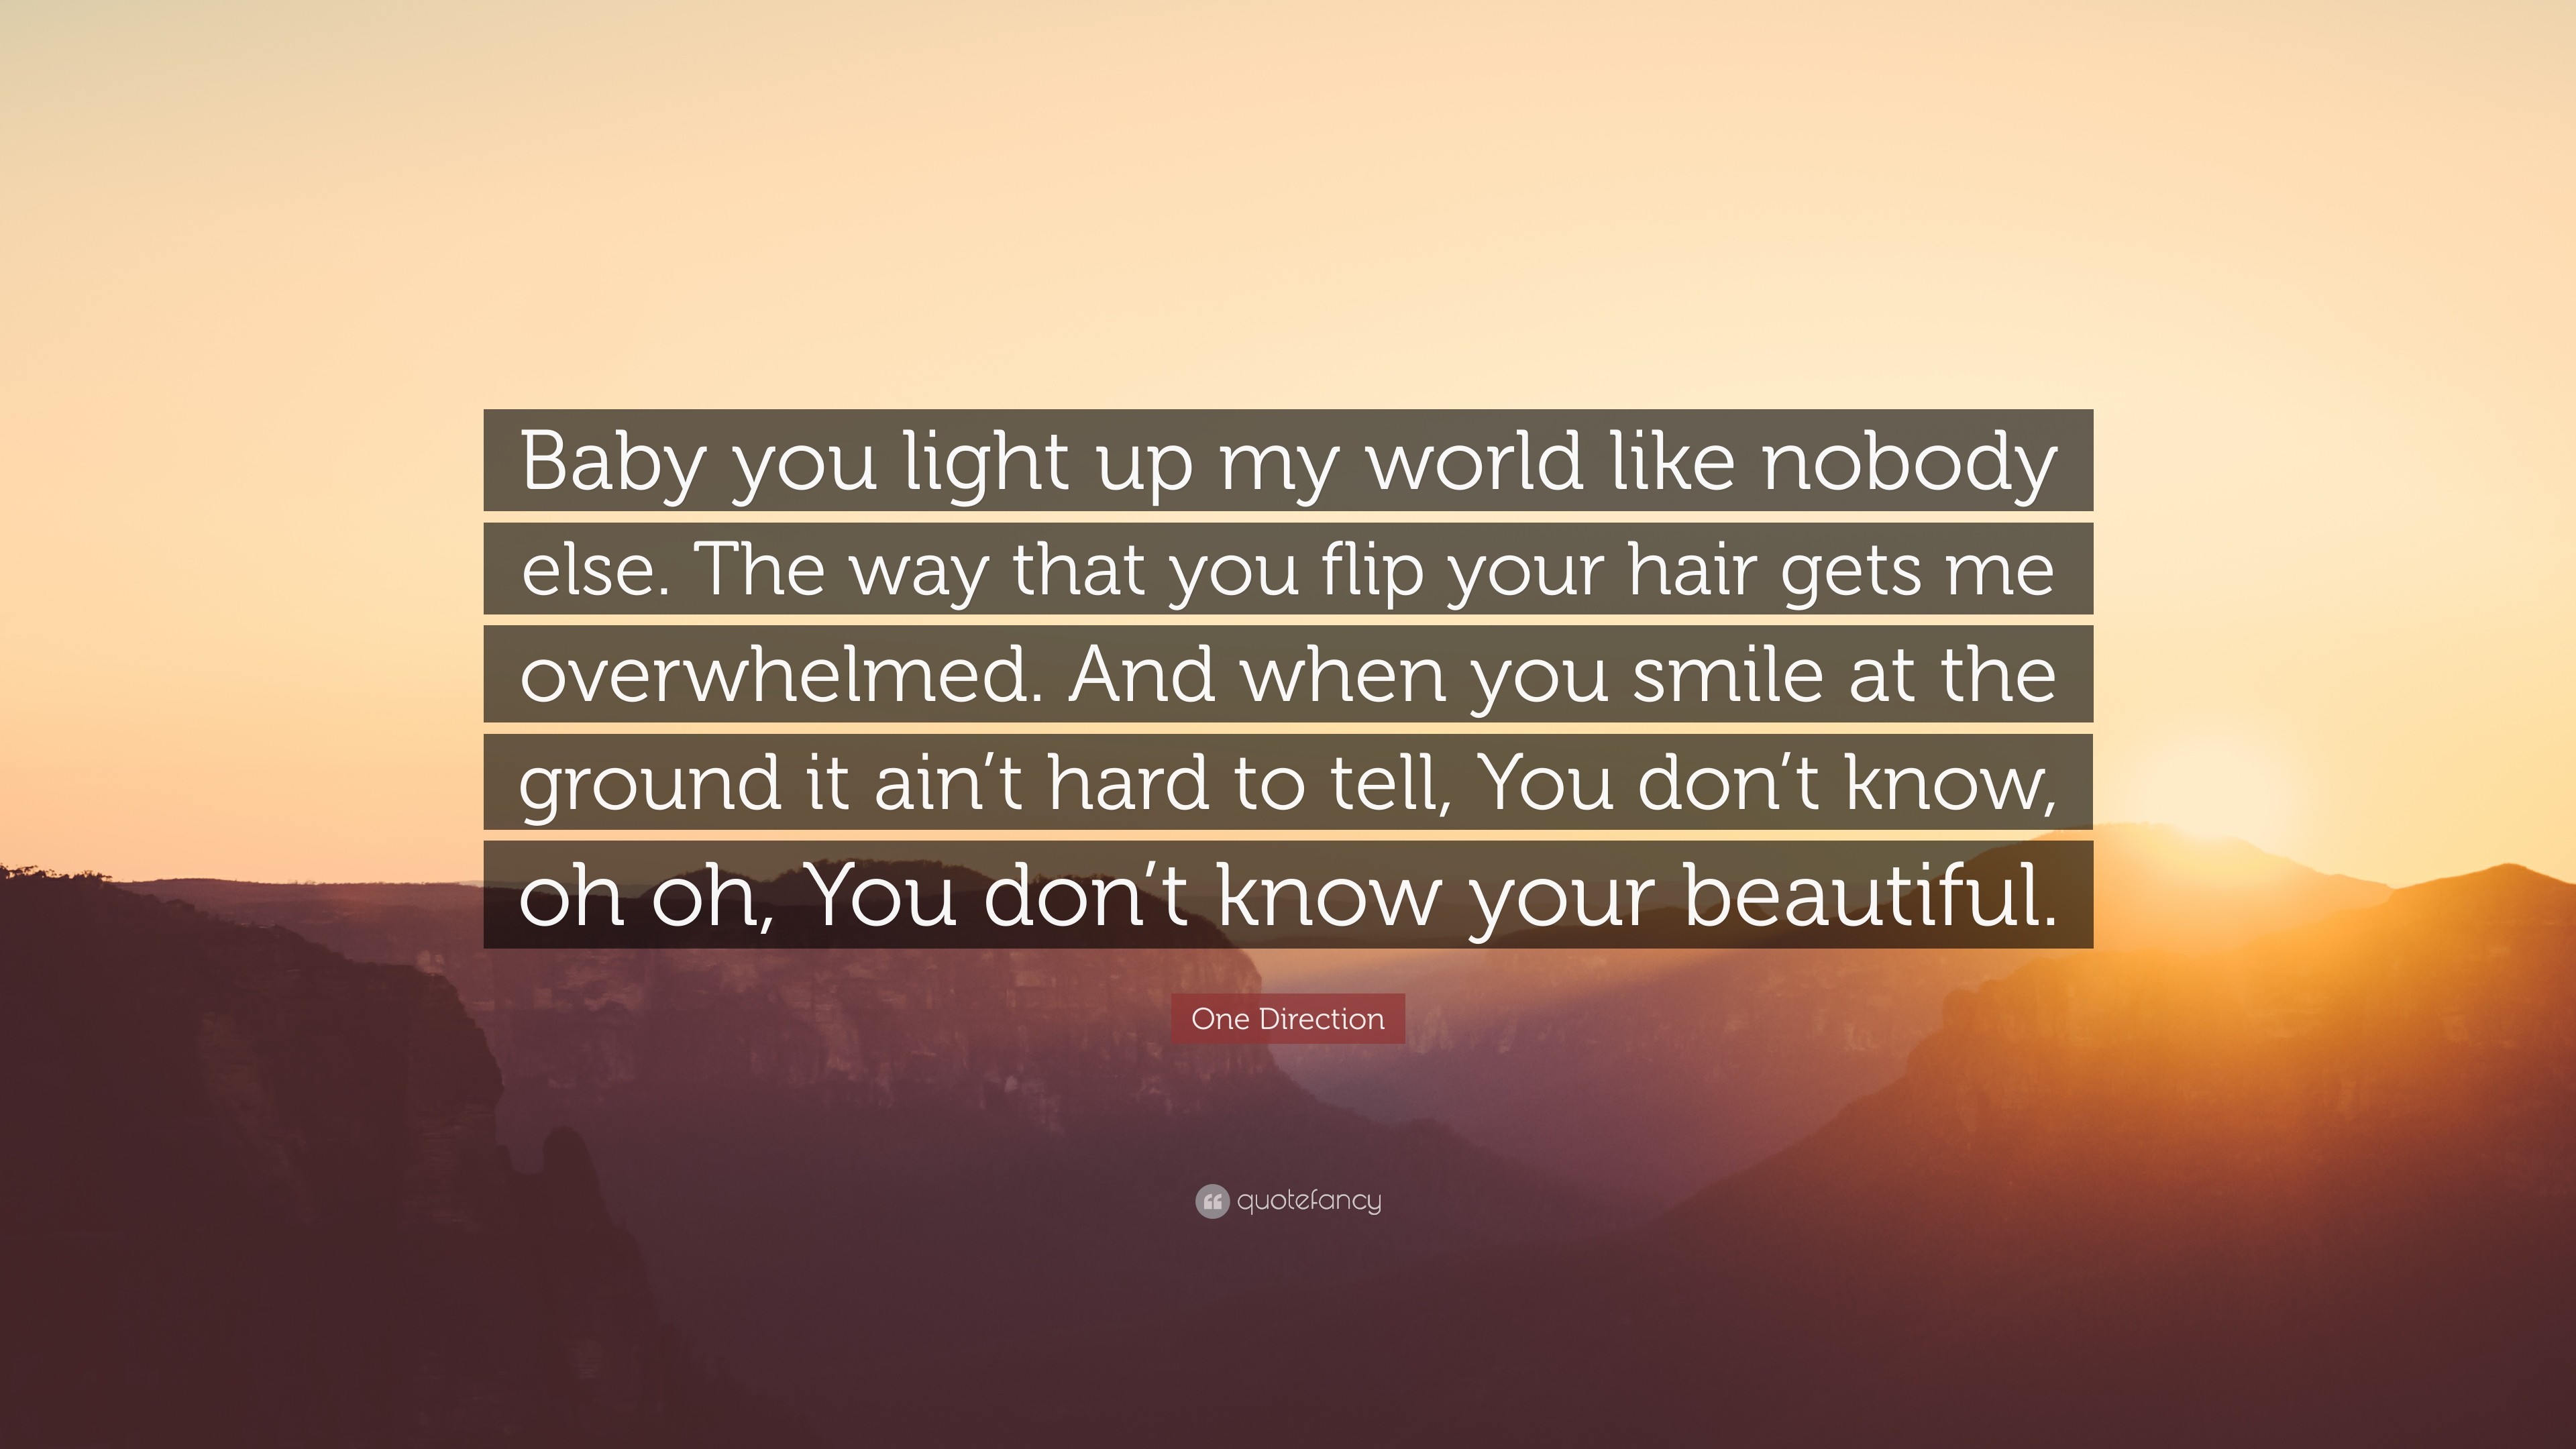 3840x2160 One Direction Quote: “Baby you light up my world like nobody else. The